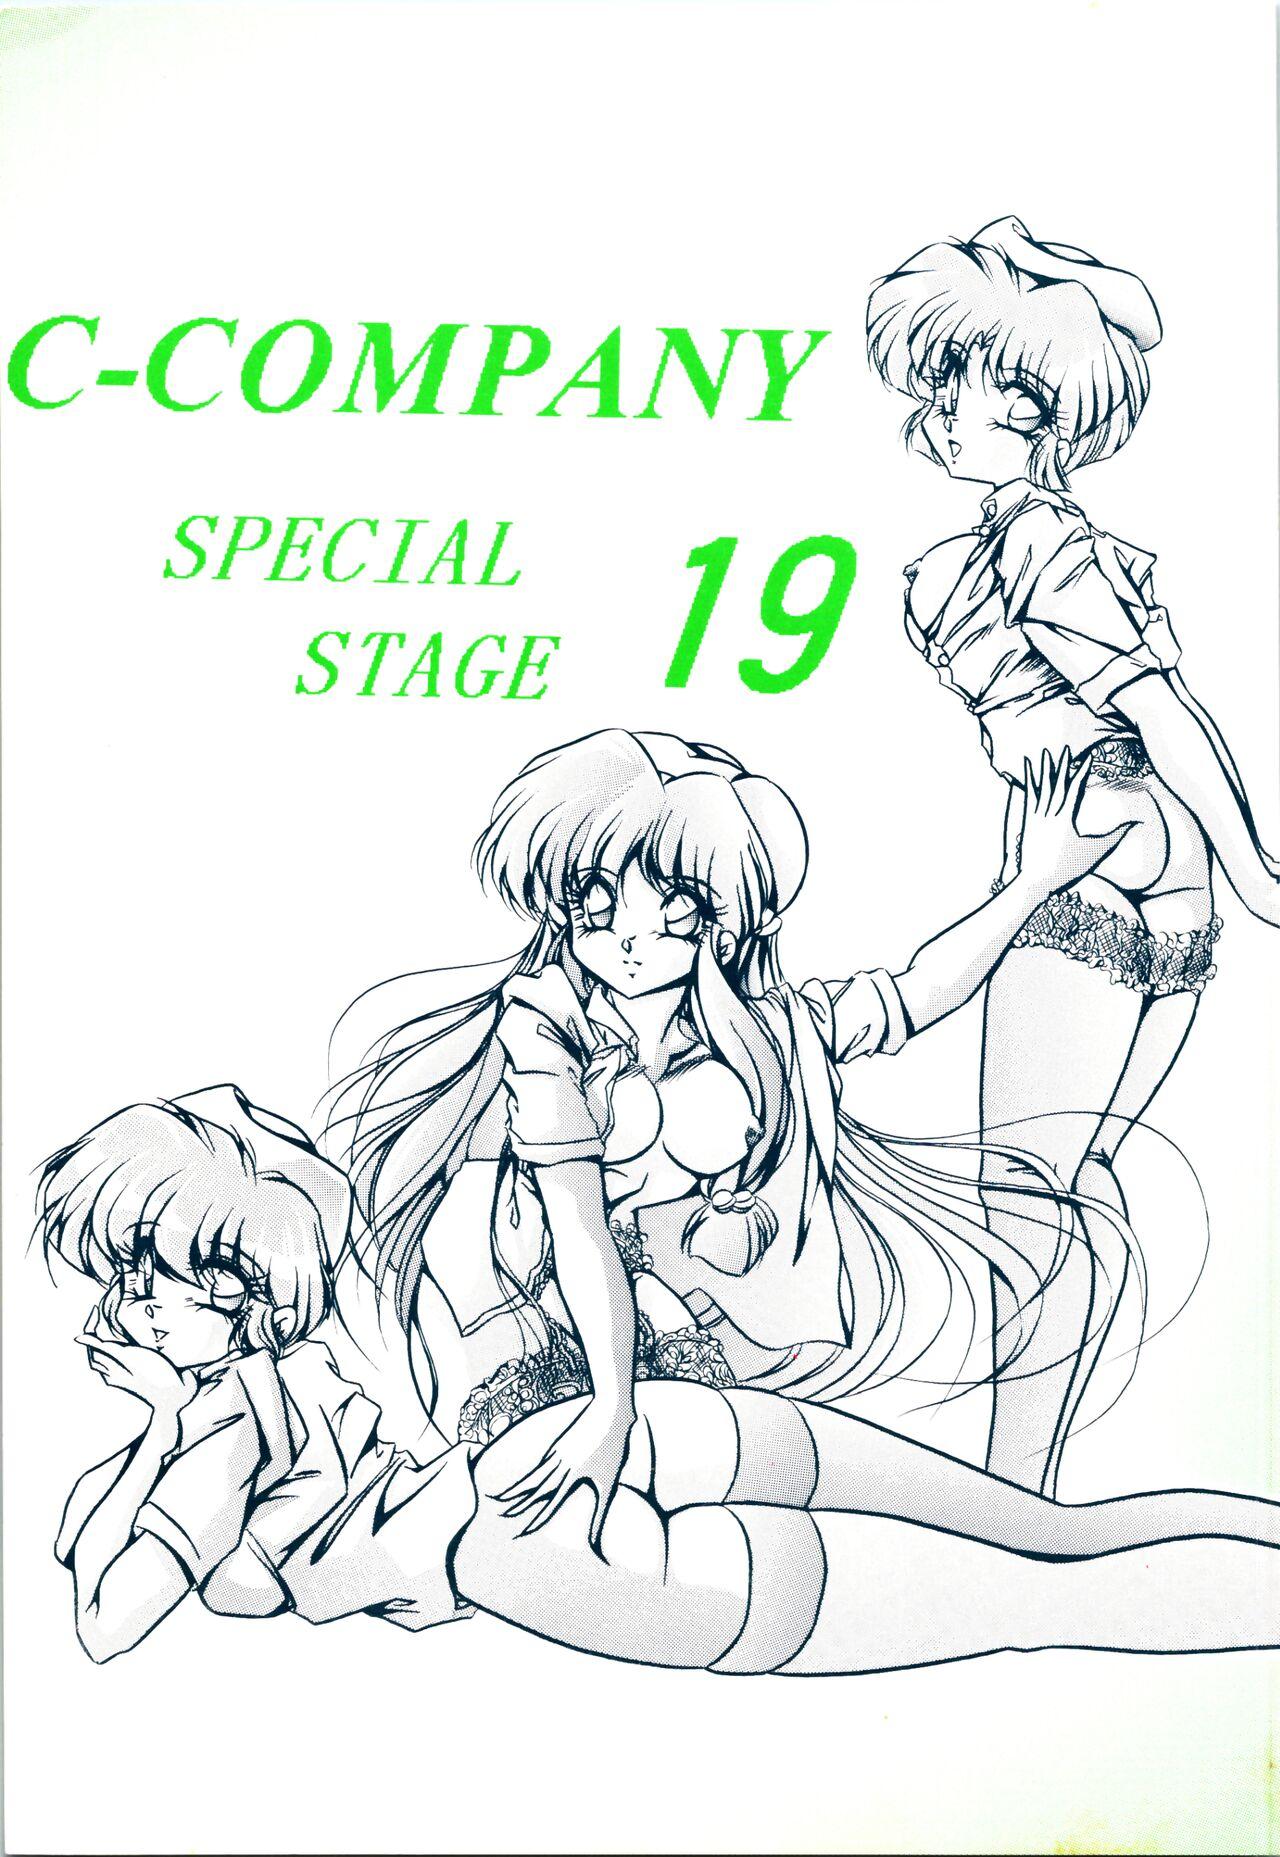 Butt C-COMPANY SPECIAL STAGE 19 - Ranma 12 Cameltoe - Picture 1